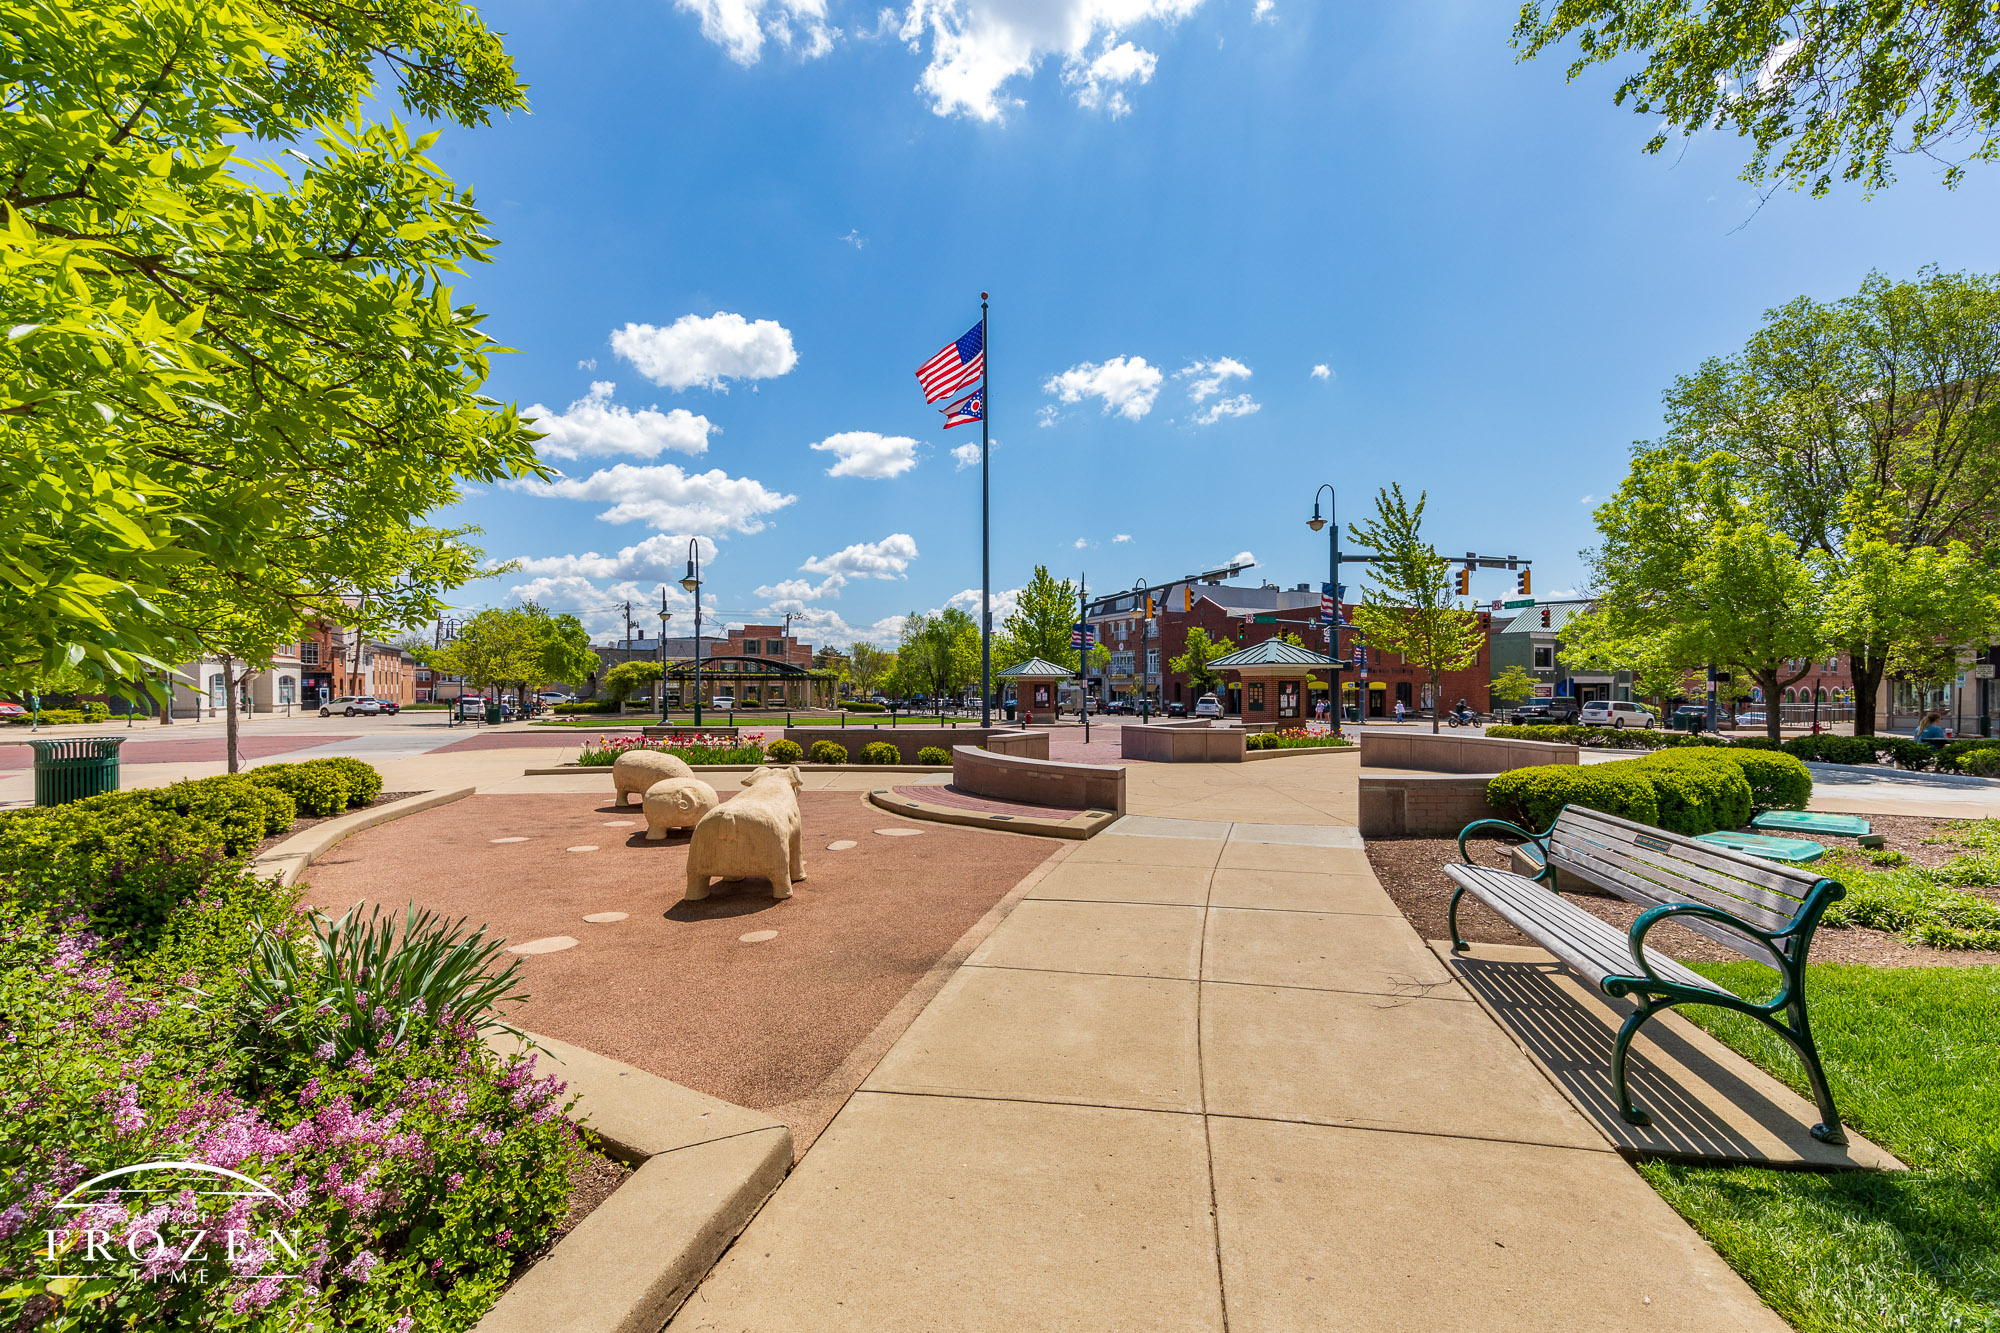 Flower beds leads the eye towards the center of Doctor Martin Luther King Jr Park under sunny skies over Oxford, Ohio